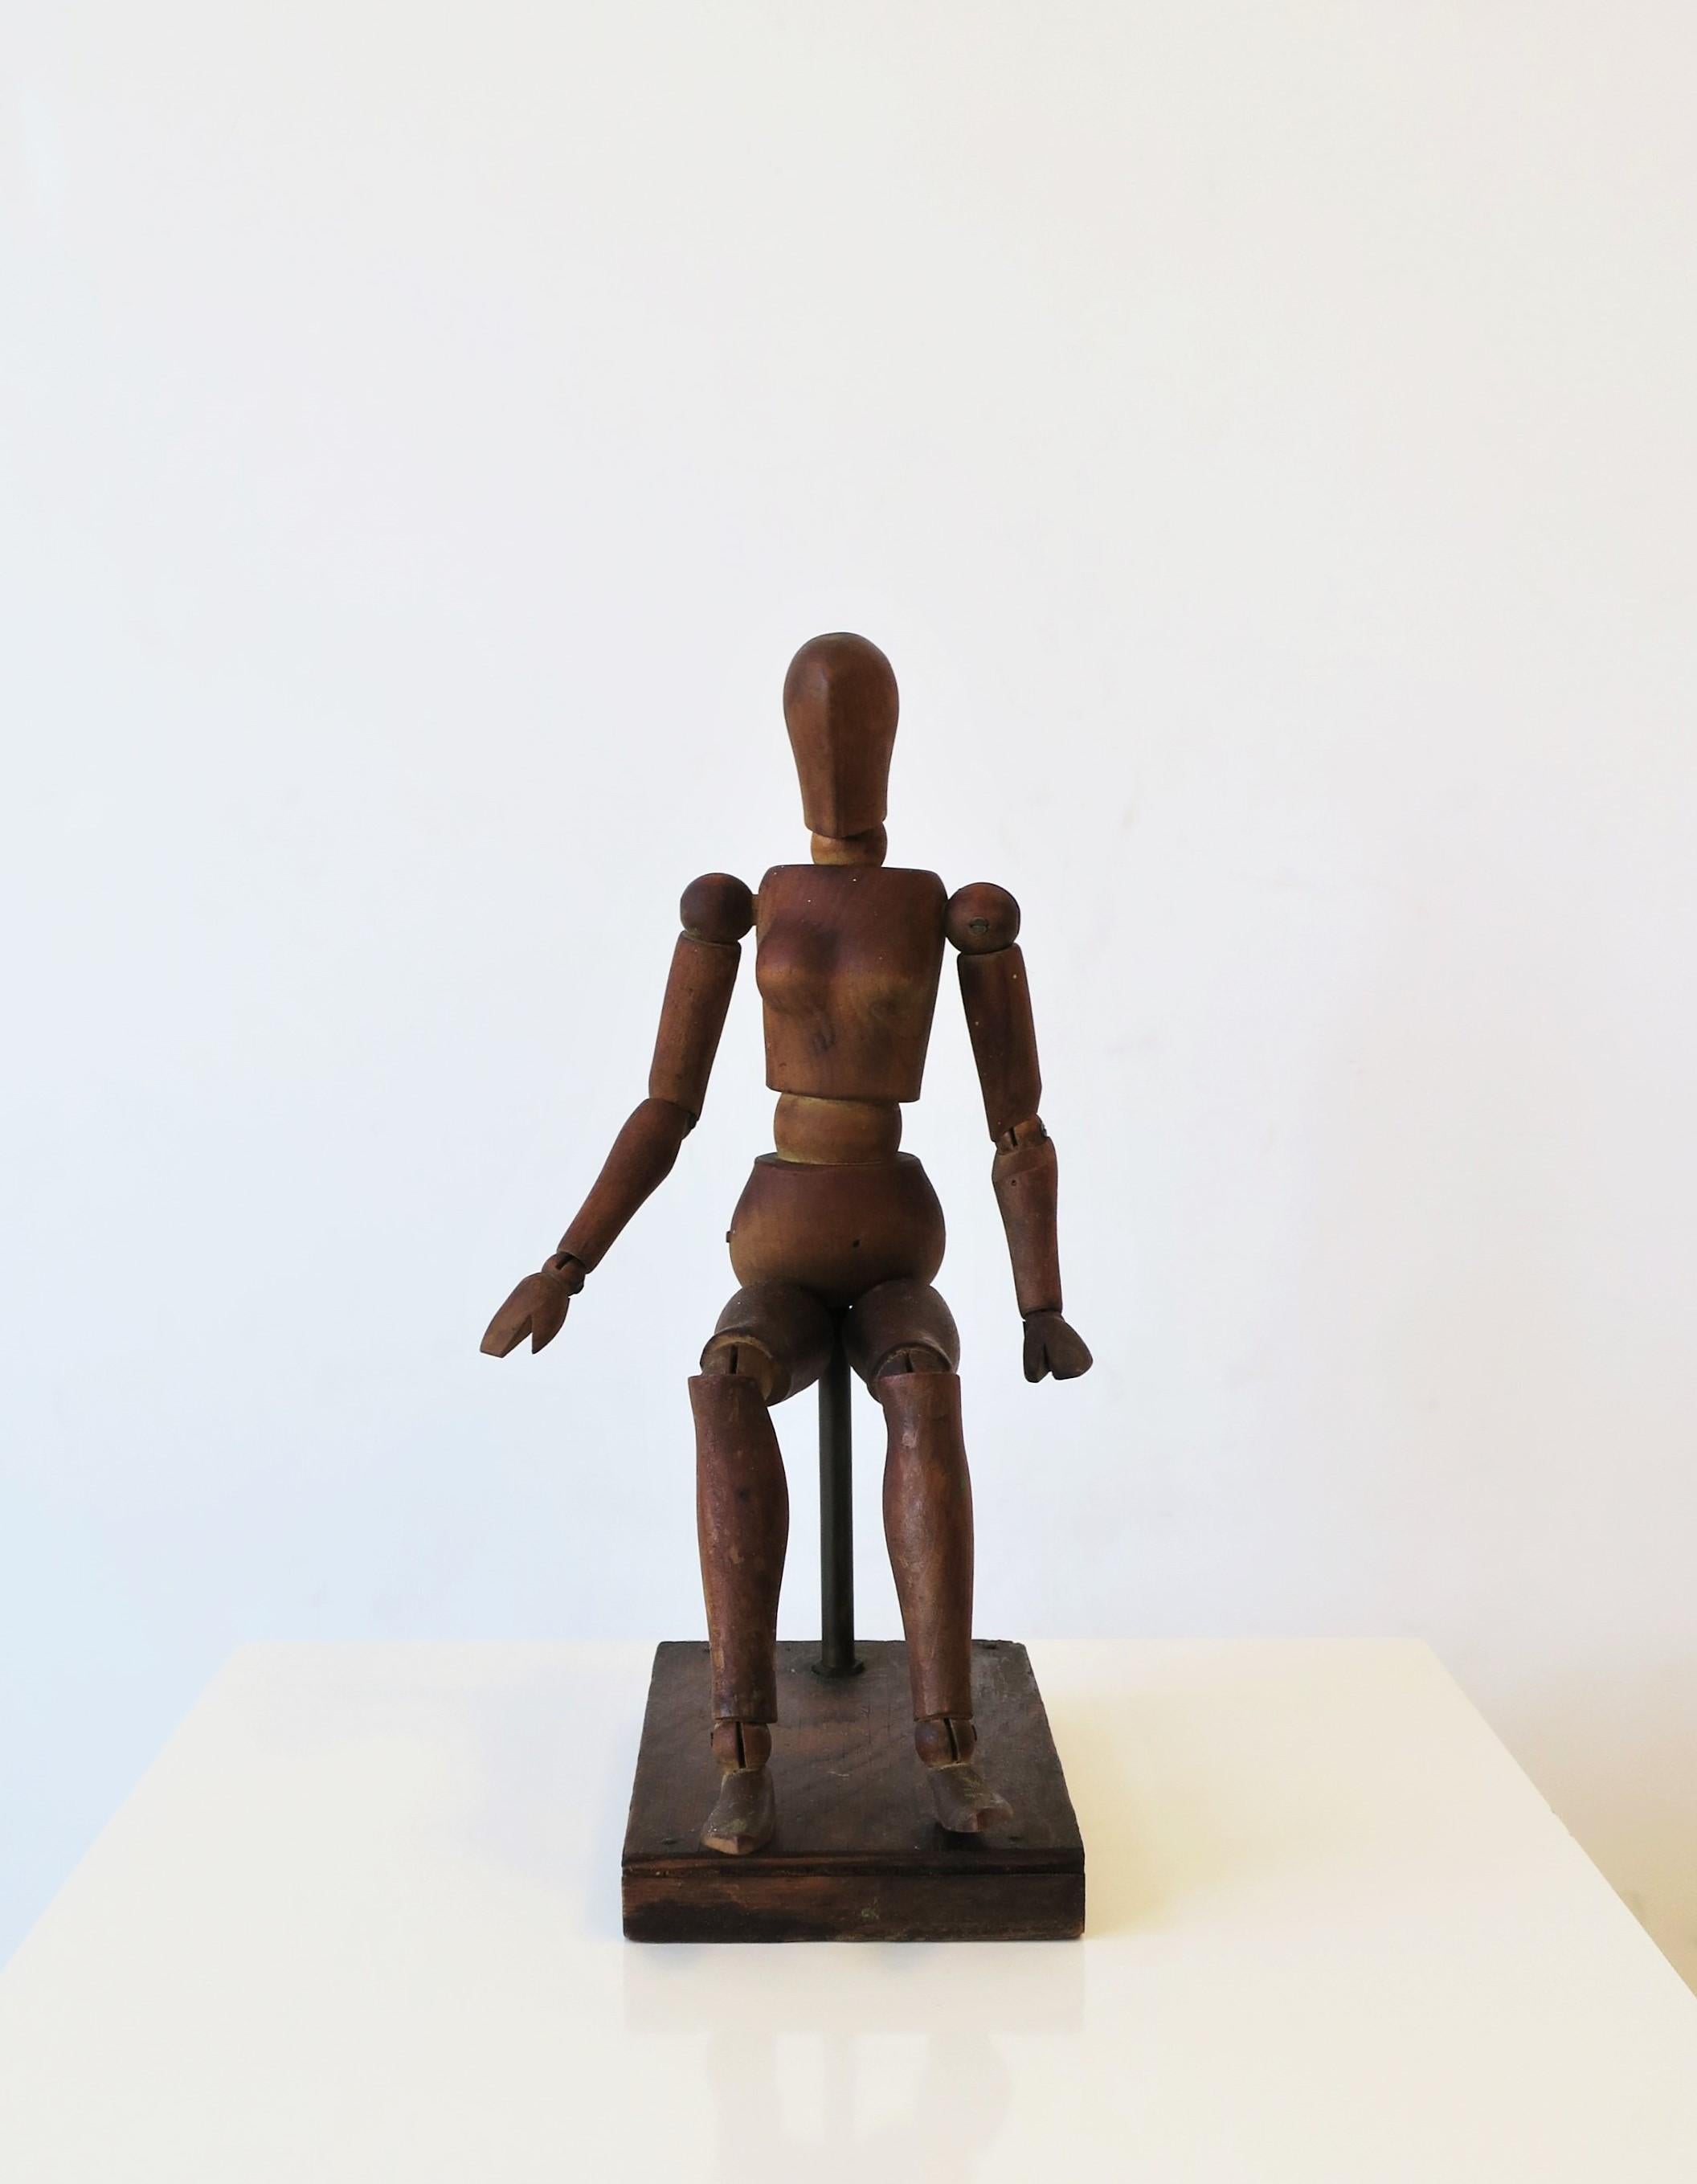 A seated vintage articulating artist wood model female figure sculpture piece with stand, circa early to mid-20th century. Dimensions including wood base: 4.94